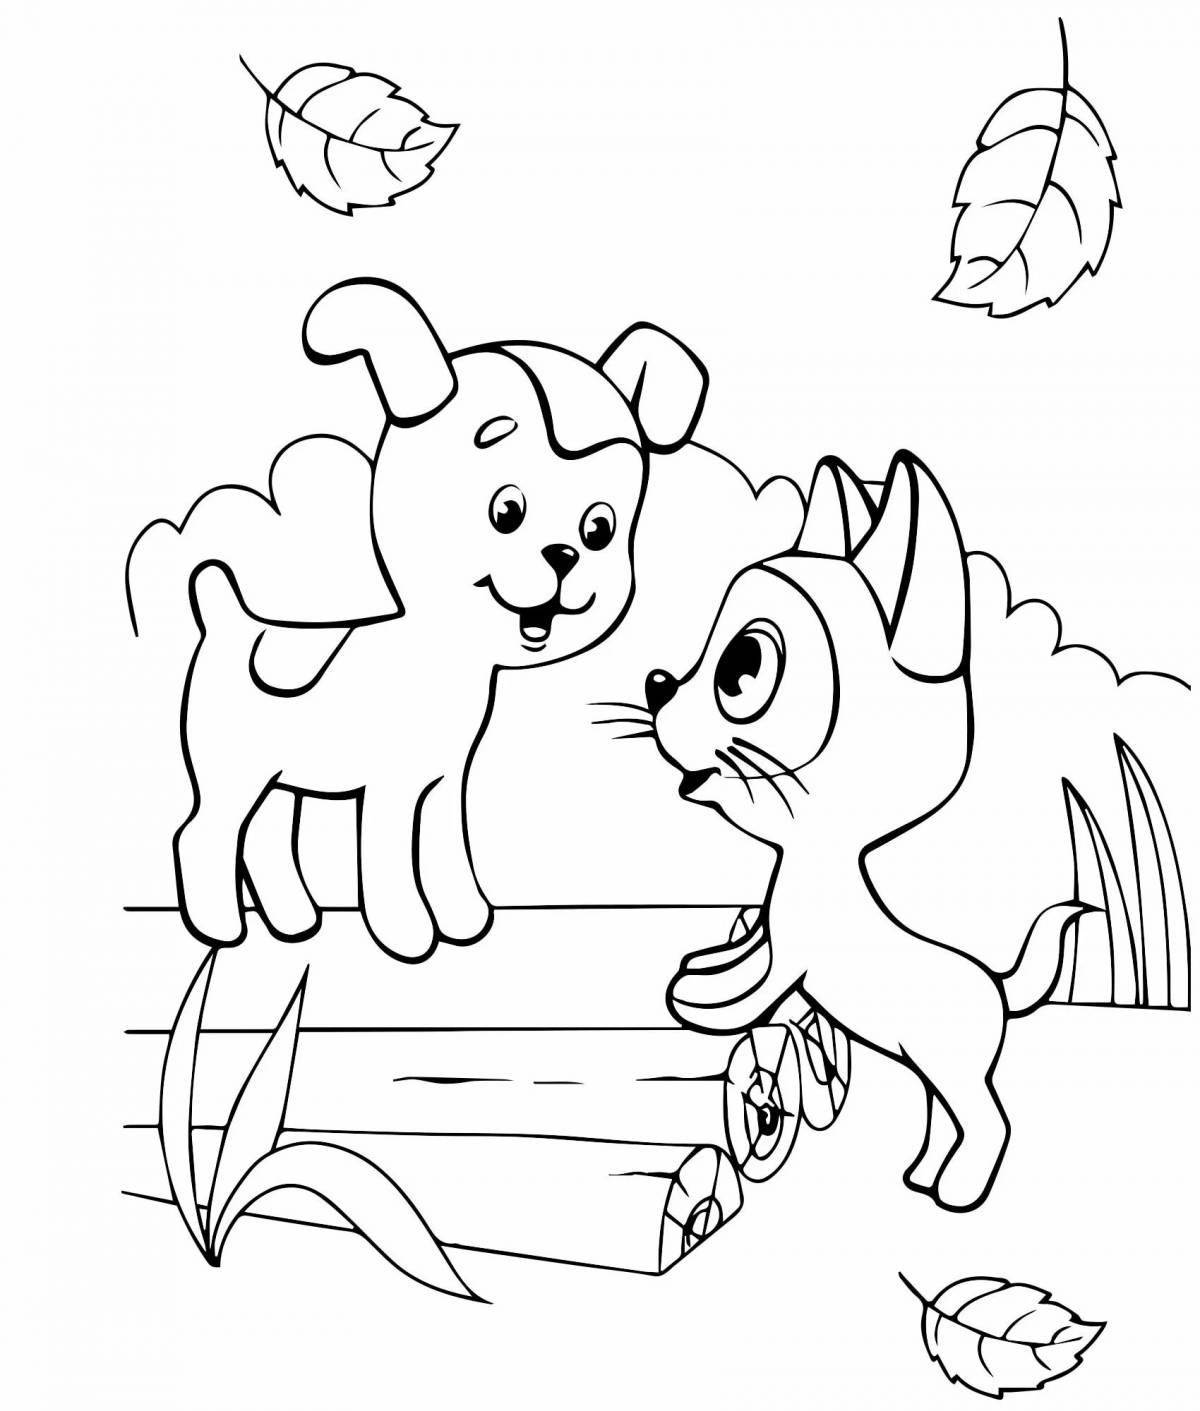 Wonderful coloring pages cats and dogs for children 3 4 years old